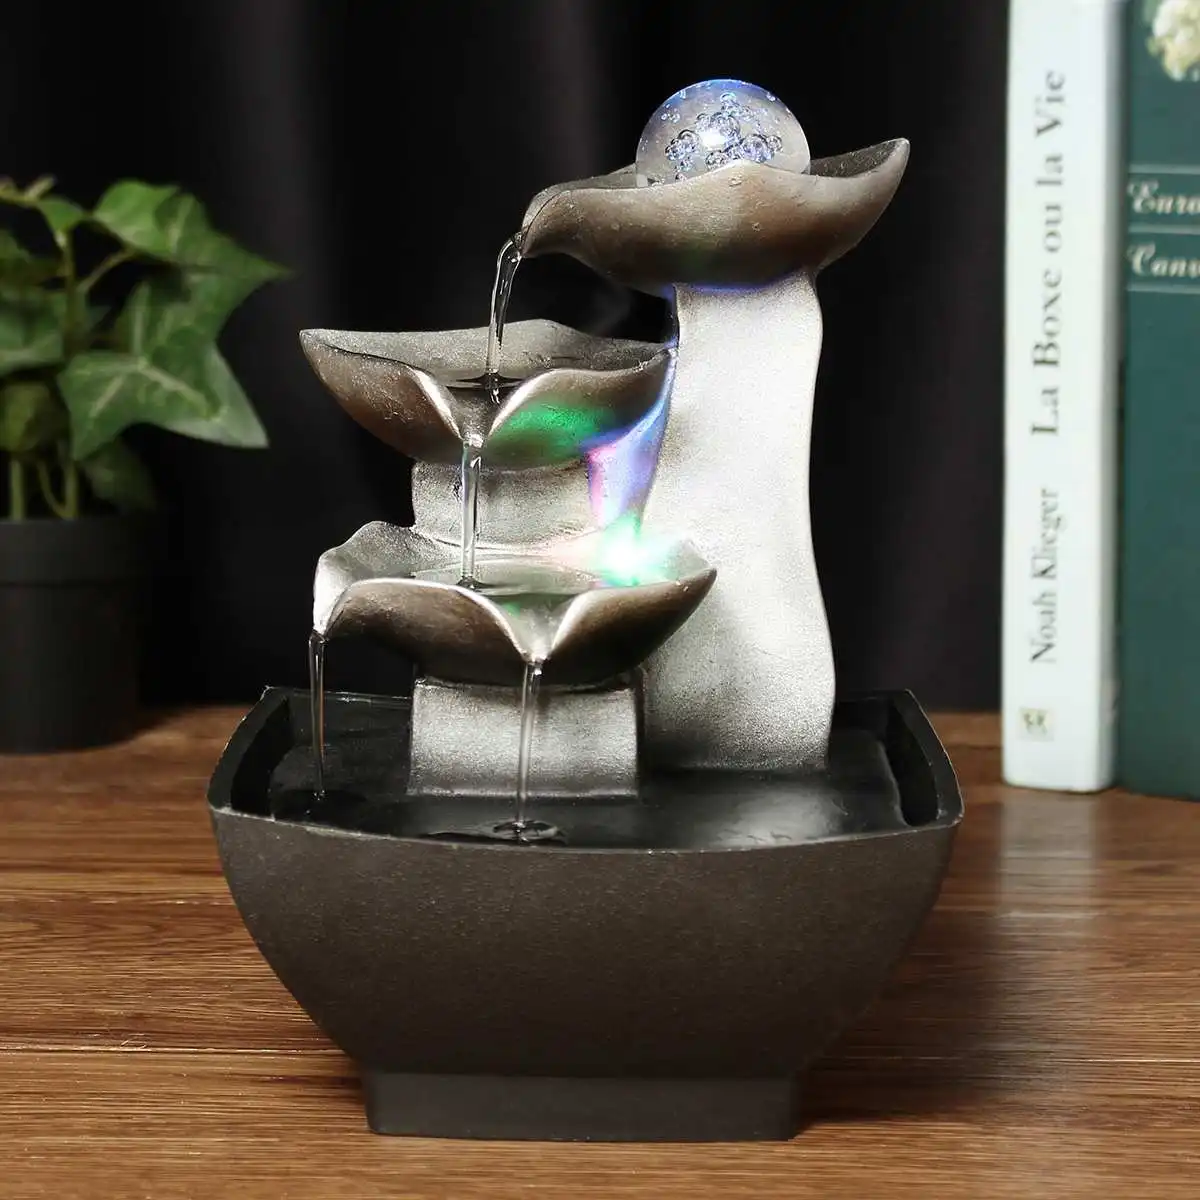 Rockery Relaxation Indoor Fountain Waterfall Feng Shui Desktop Water Sound Table Ornaments Crafts Home Decoration Accessories